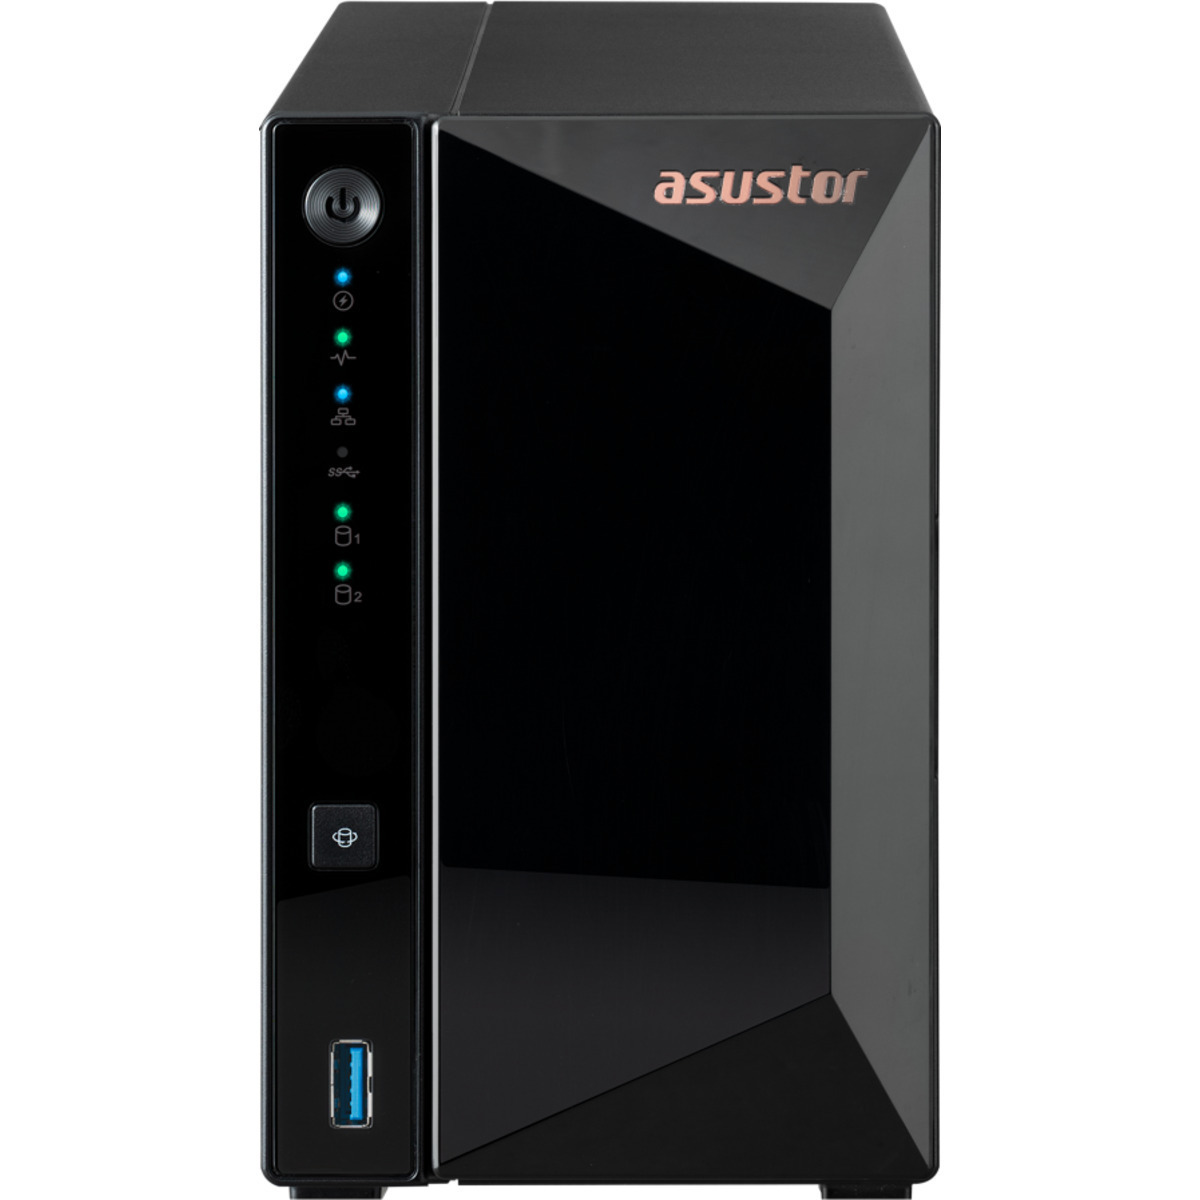 ASUSTOR DRIVESTOR 2 Pro AS3302T 12tb 2-Bay Desktop Personal / Basic Home / Small Office NAS - Network Attached Storage Device 2x6tb Seagate IronWolf ST6000VN006 3.5 5400rpm SATA 6Gb/s HDD NAS Class Drives Installed - Burn-In Tested DRIVESTOR 2 Pro AS3302T